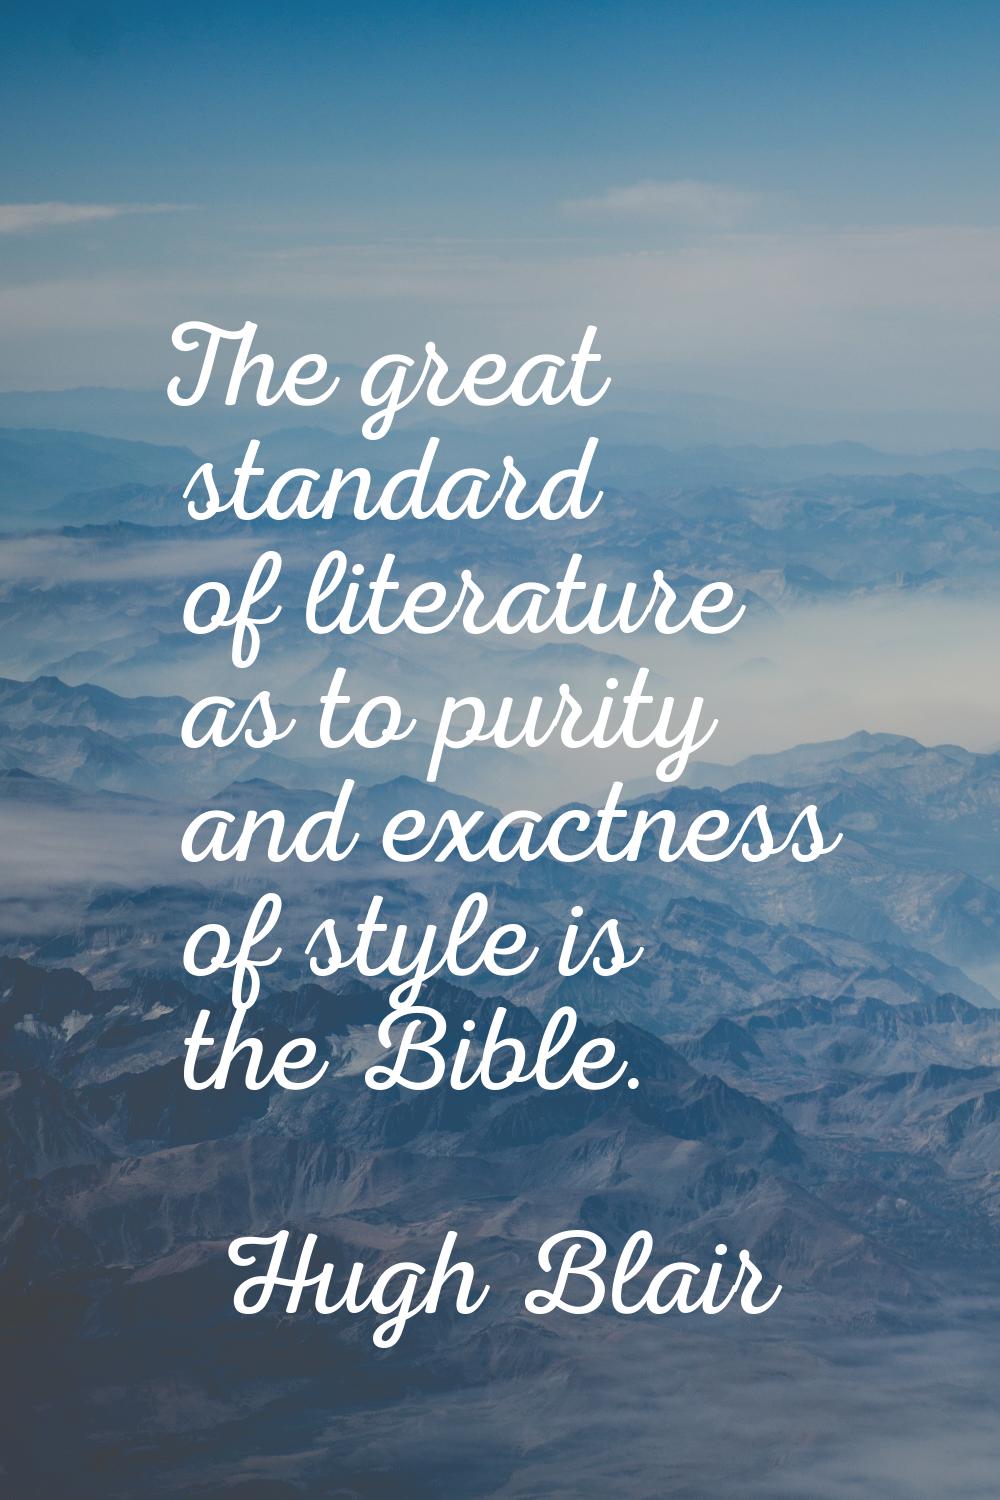 The great standard of literature as to purity and exactness of style is the Bible.